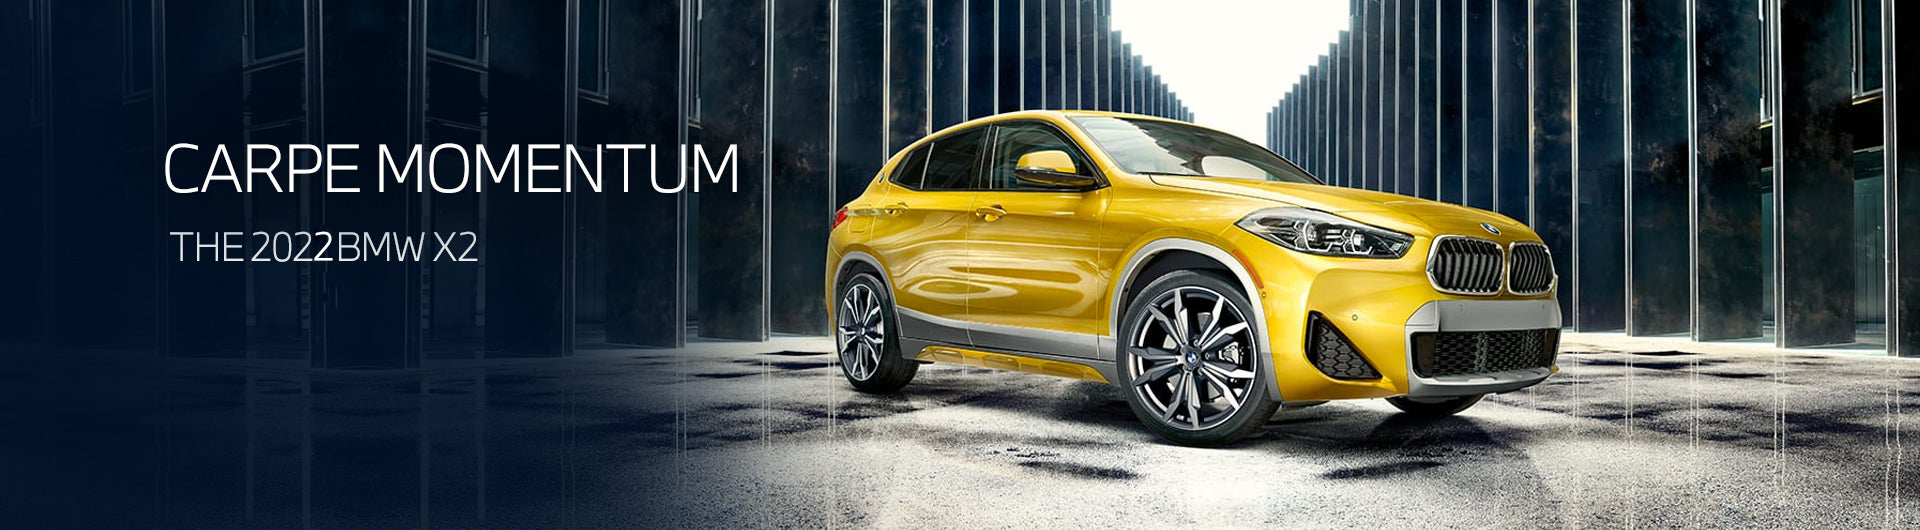 The New 2022 BMW X2 at BMW of Morristown